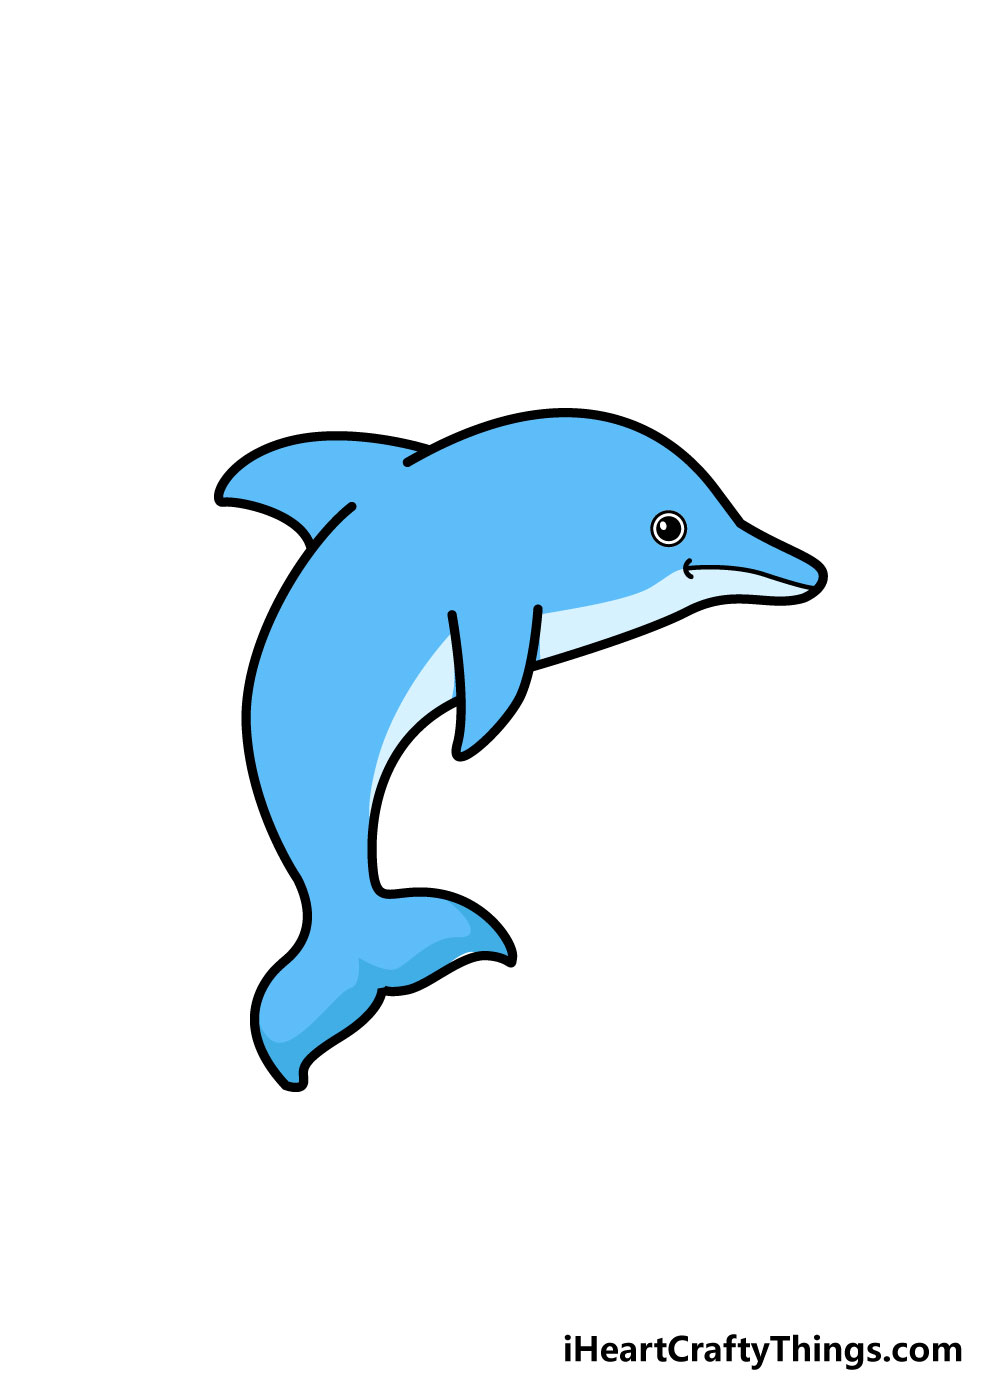 How to Draw a Dolphin for Kids